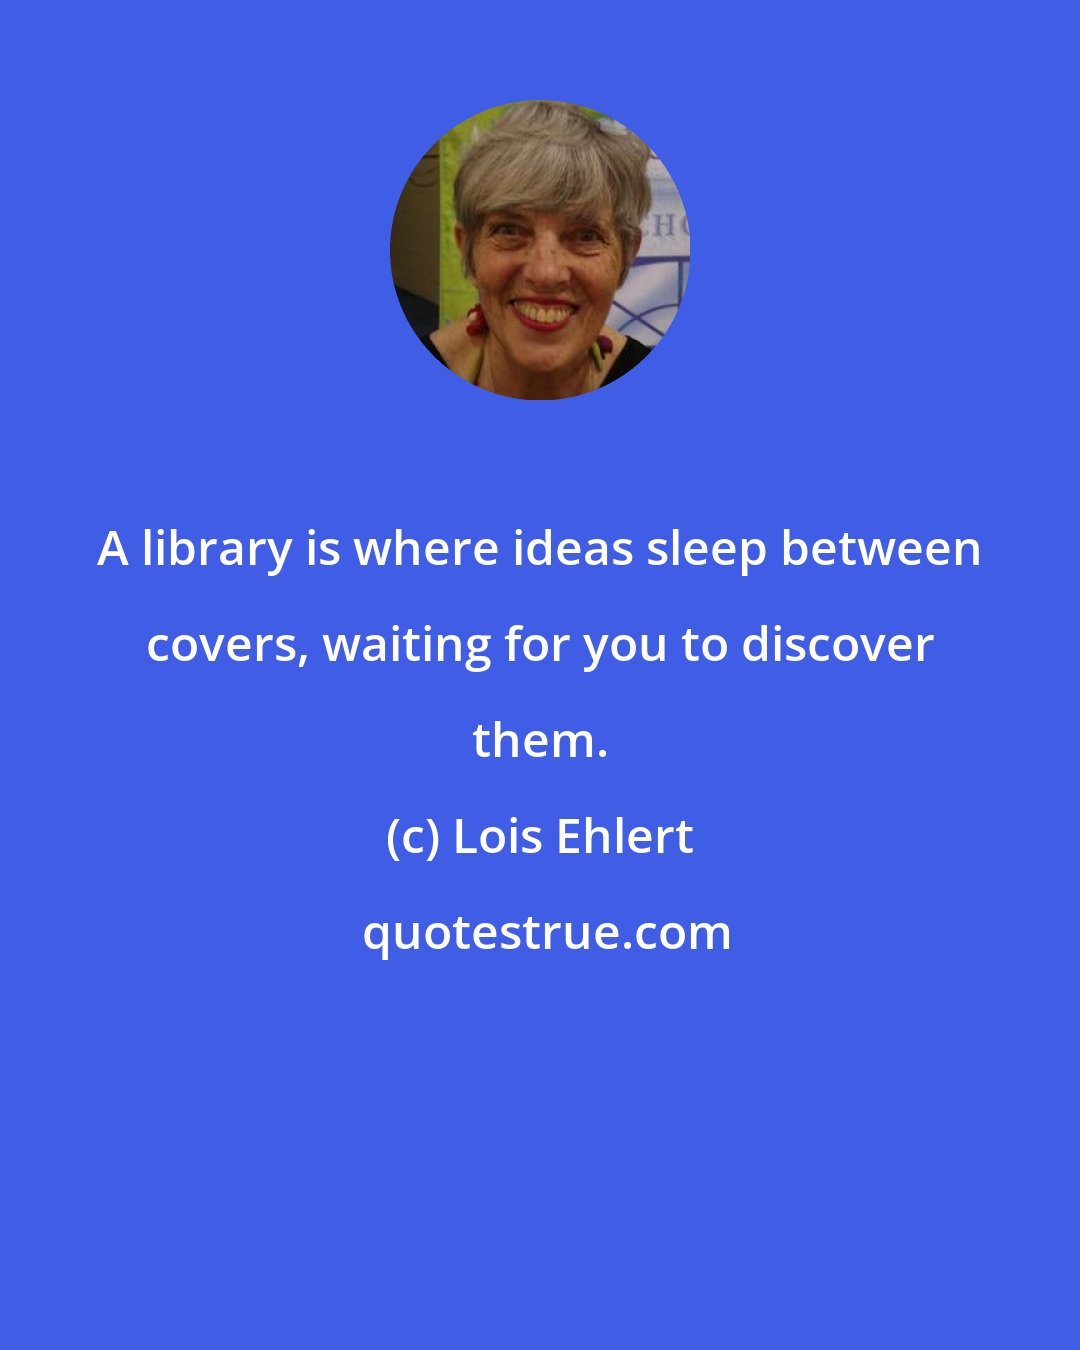 Lois Ehlert: A library is where ideas sleep between covers, waiting for you to discover them.